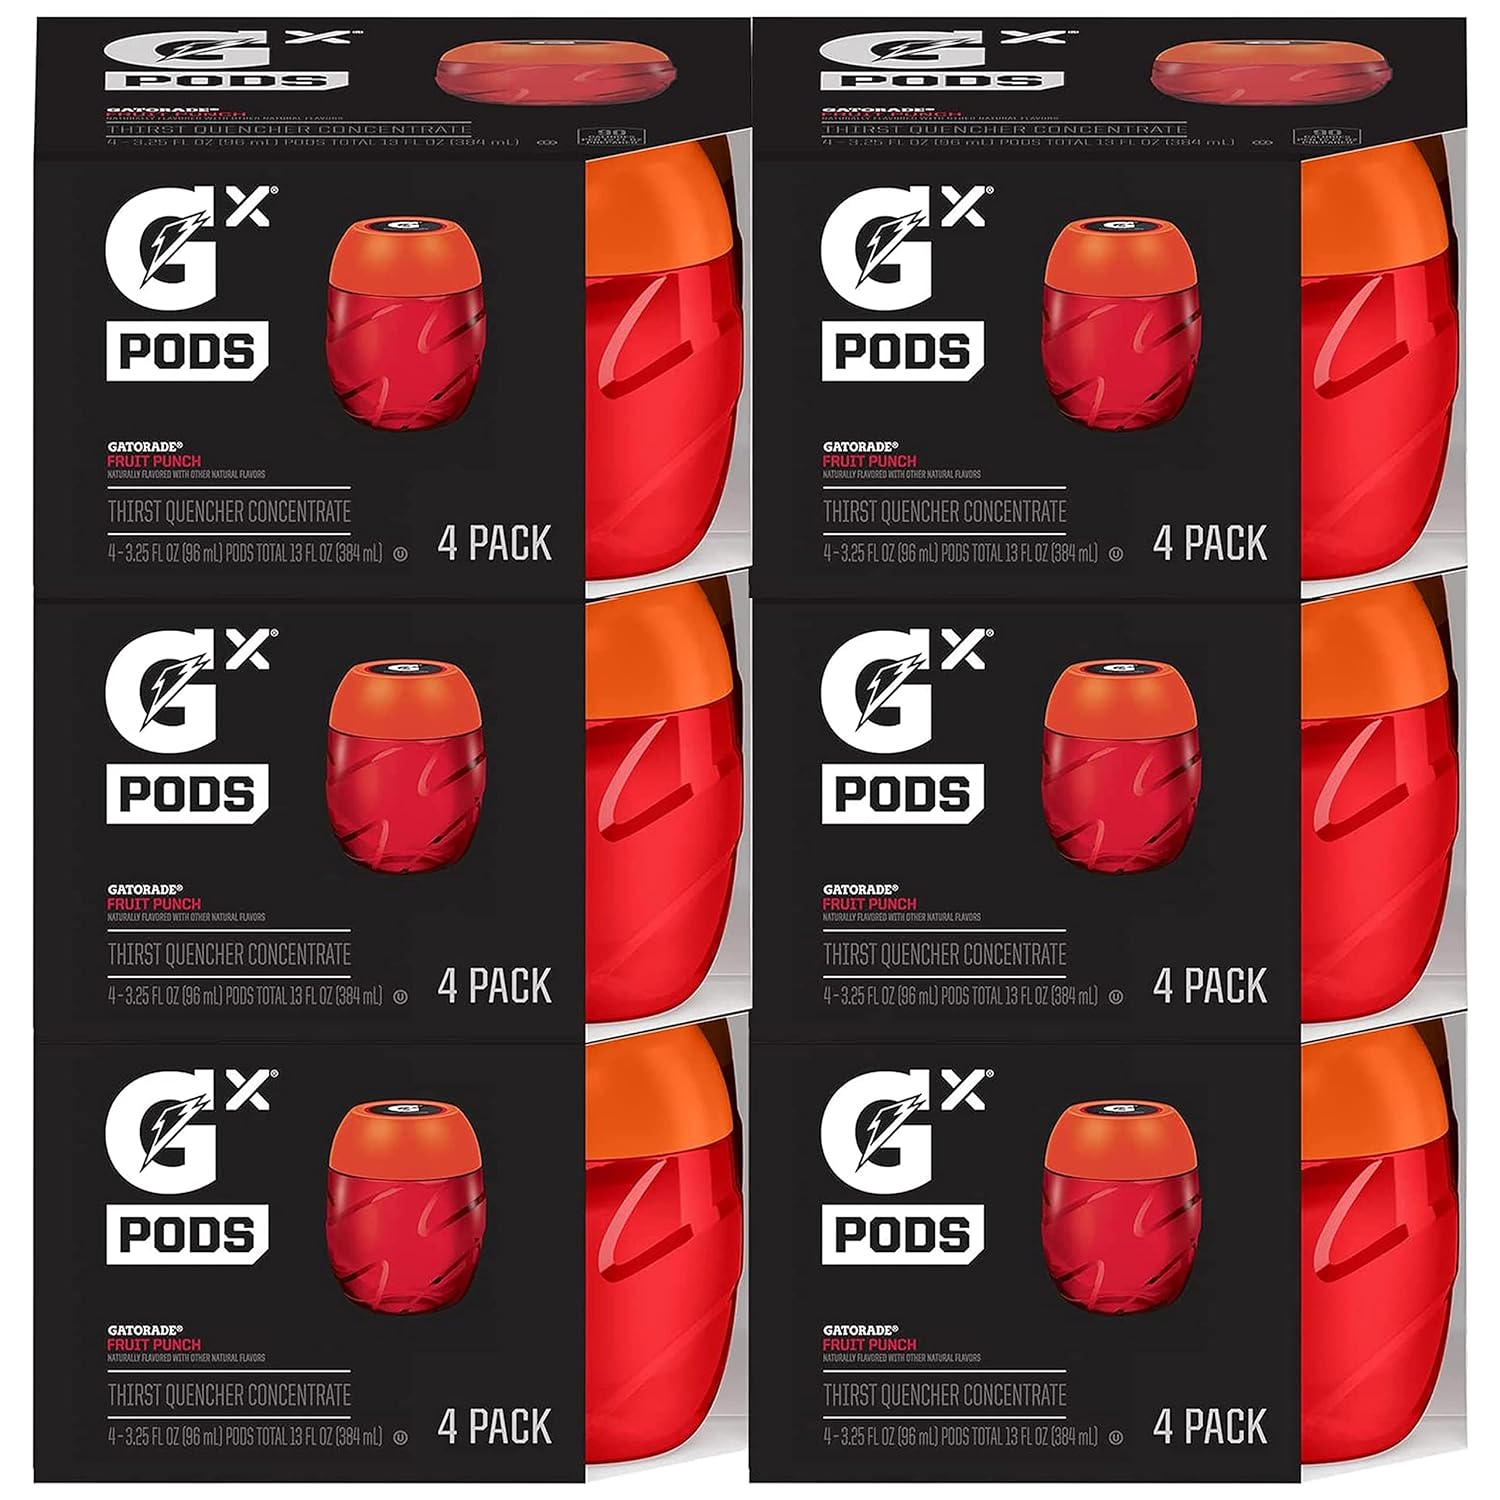 Gatorade Gx Pods Fruit Punch 4.325 ounce (Pack of 24)